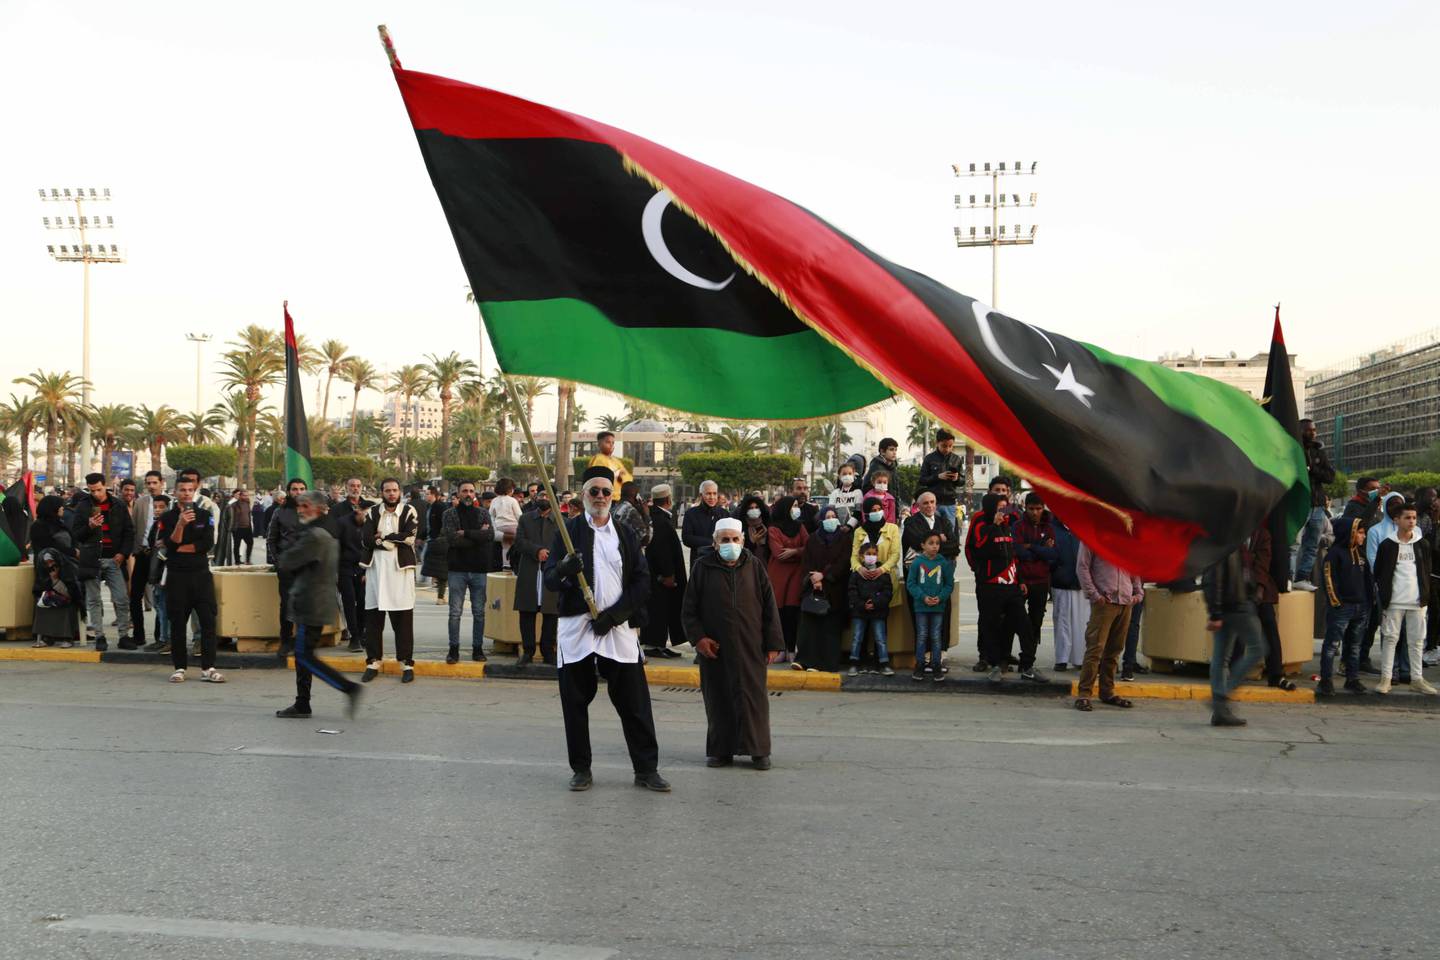 Libyans celebrate the 70th anniversary of their country's independence despite widespread disappointment over the postponement of the presidential electionsv which had been scheduled to take place on Friday. AP
